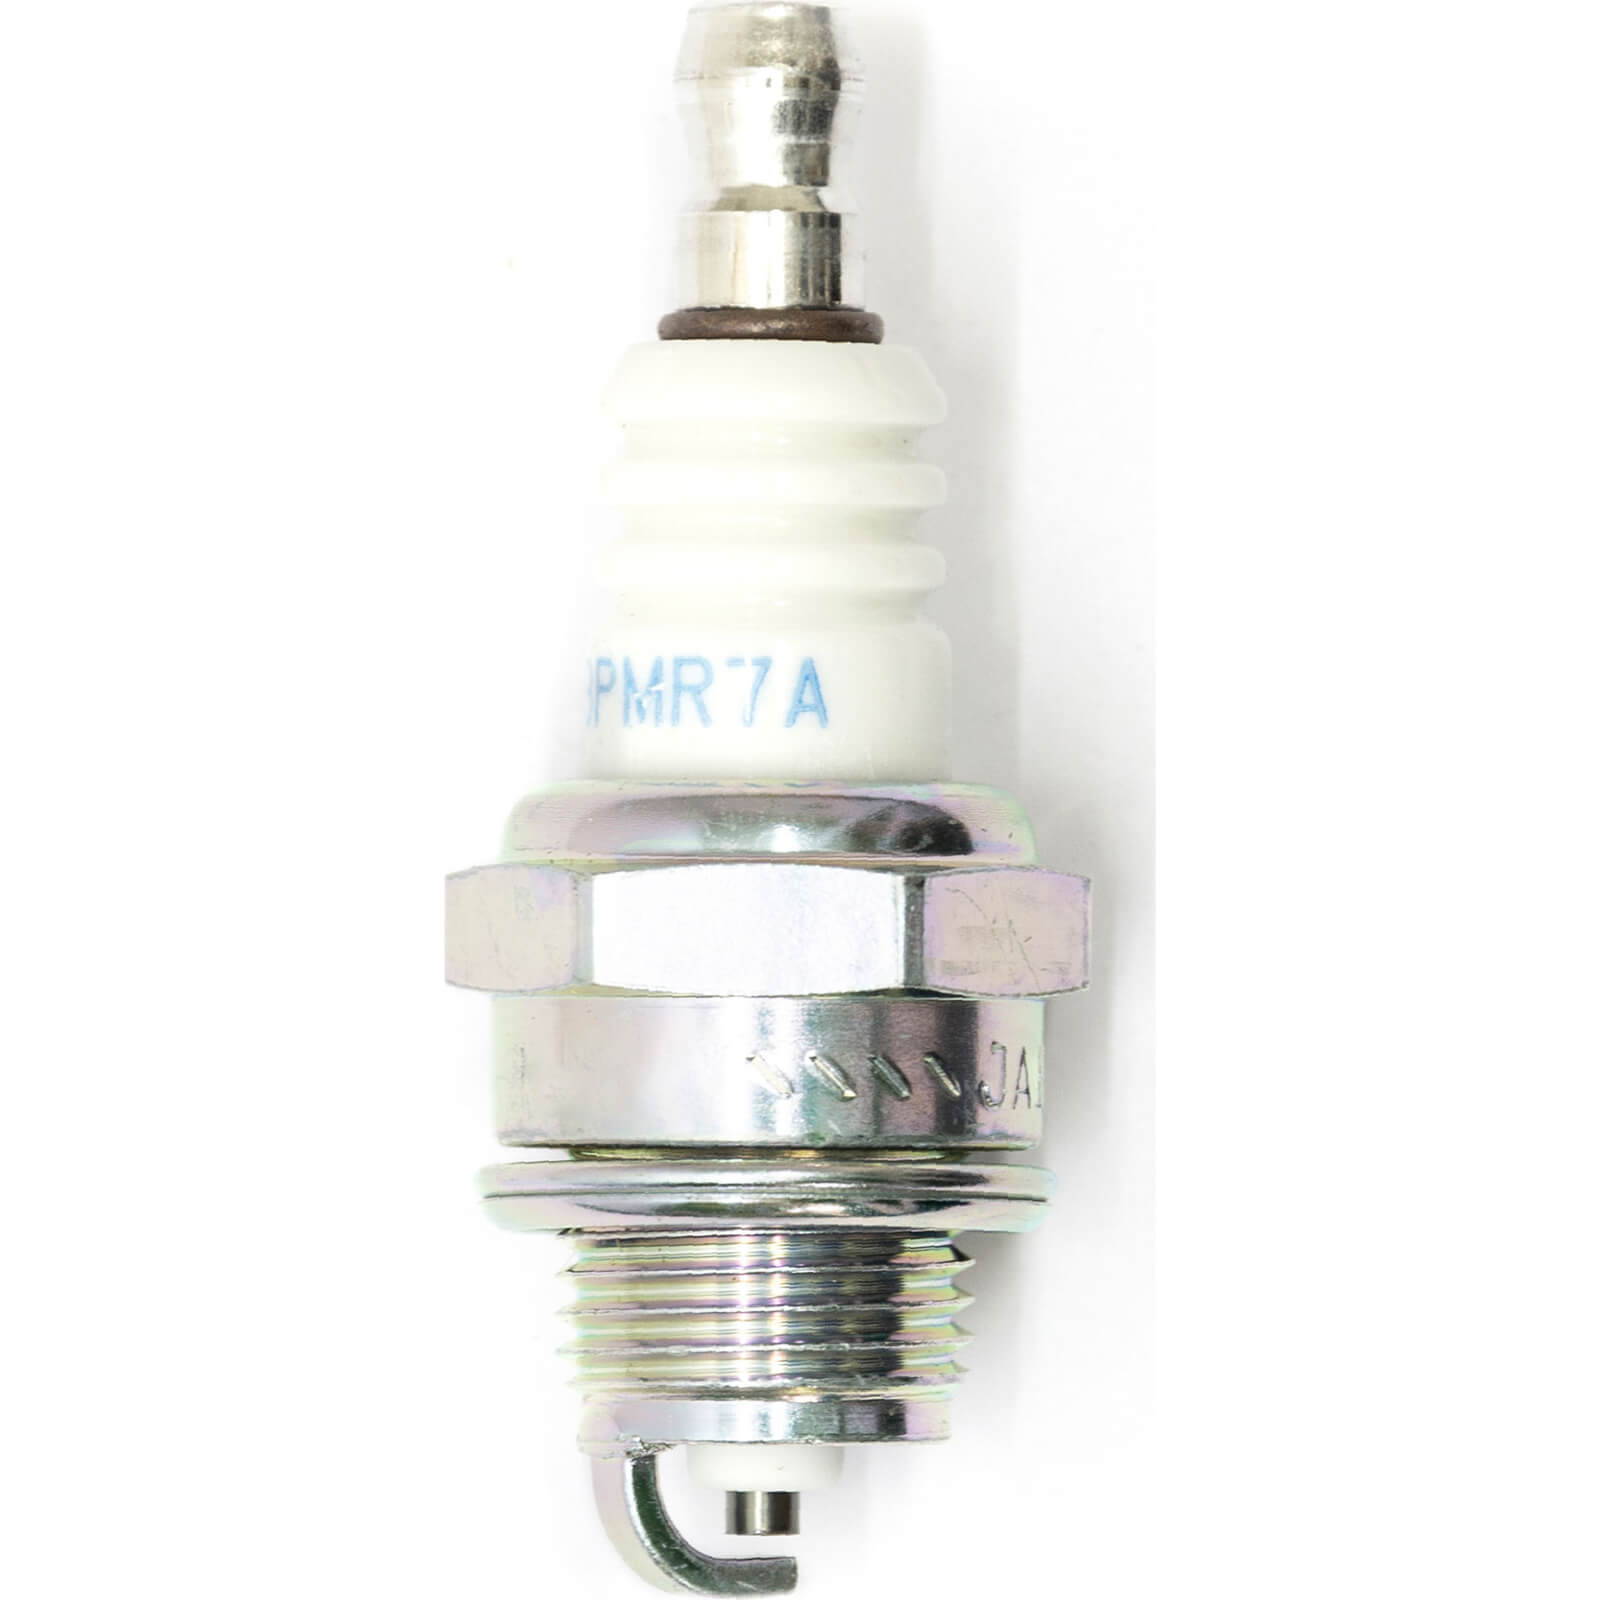 Image of Handy Spark Plug 19mm Fits most 2 Stroke Grass Trimmers, Brushcutters and Chainsaws